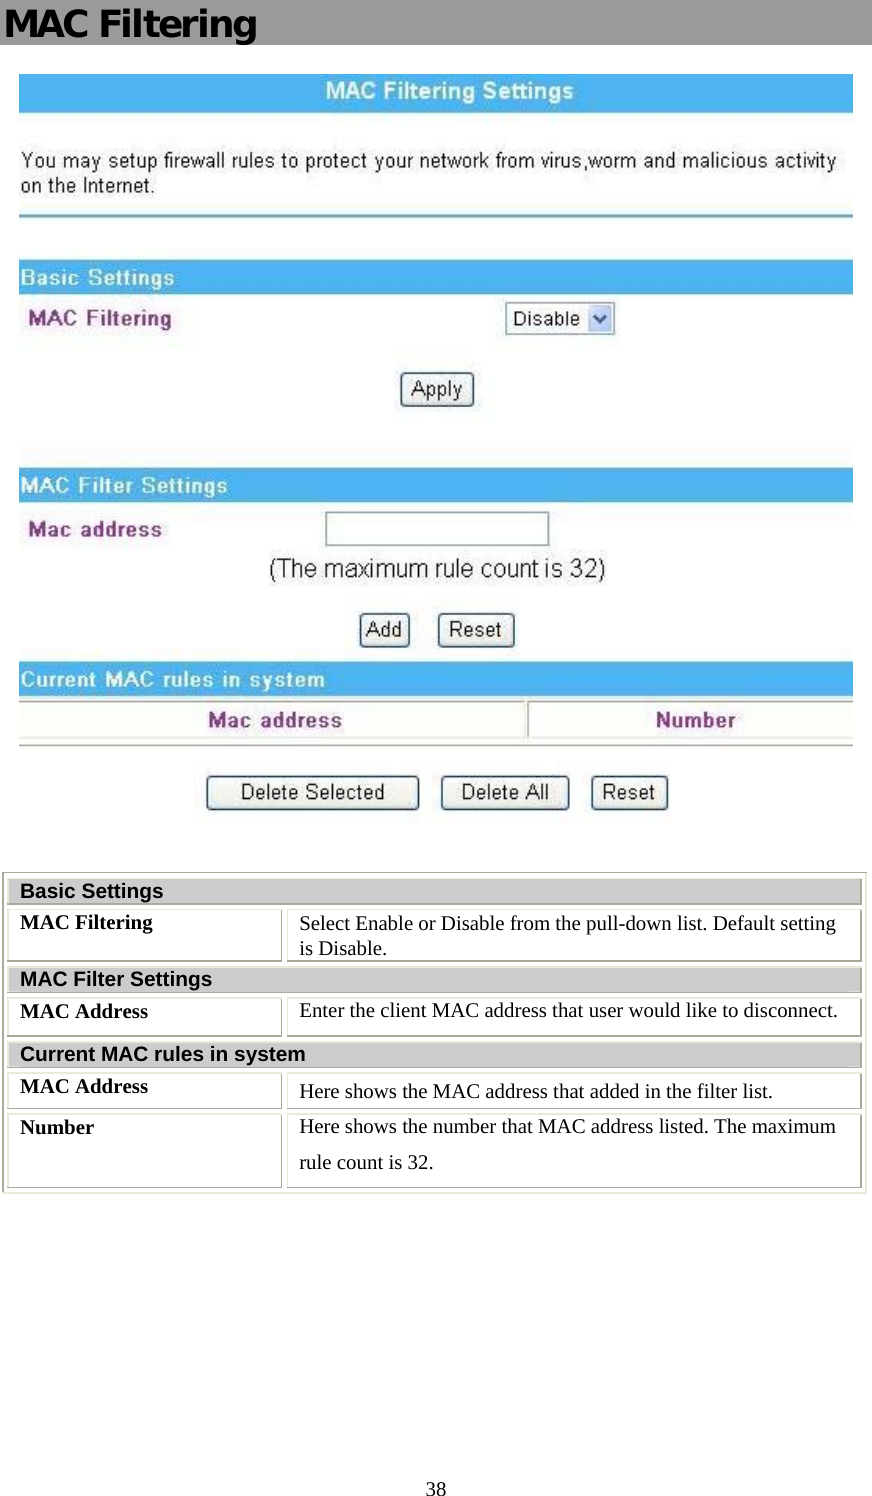   38MAC Filtering   Basic Settings MAC Filtering  Select Enable or Disable from the pull-down list. Default setting is Disable. MAC Filter Settings MAC Address  Enter the client MAC address that user would like to disconnect.  Current MAC rules in system MAC Address  Here shows the MAC address that added in the filter list. Number  Here shows the number that MAC address listed. The maximum rule count is 32.   